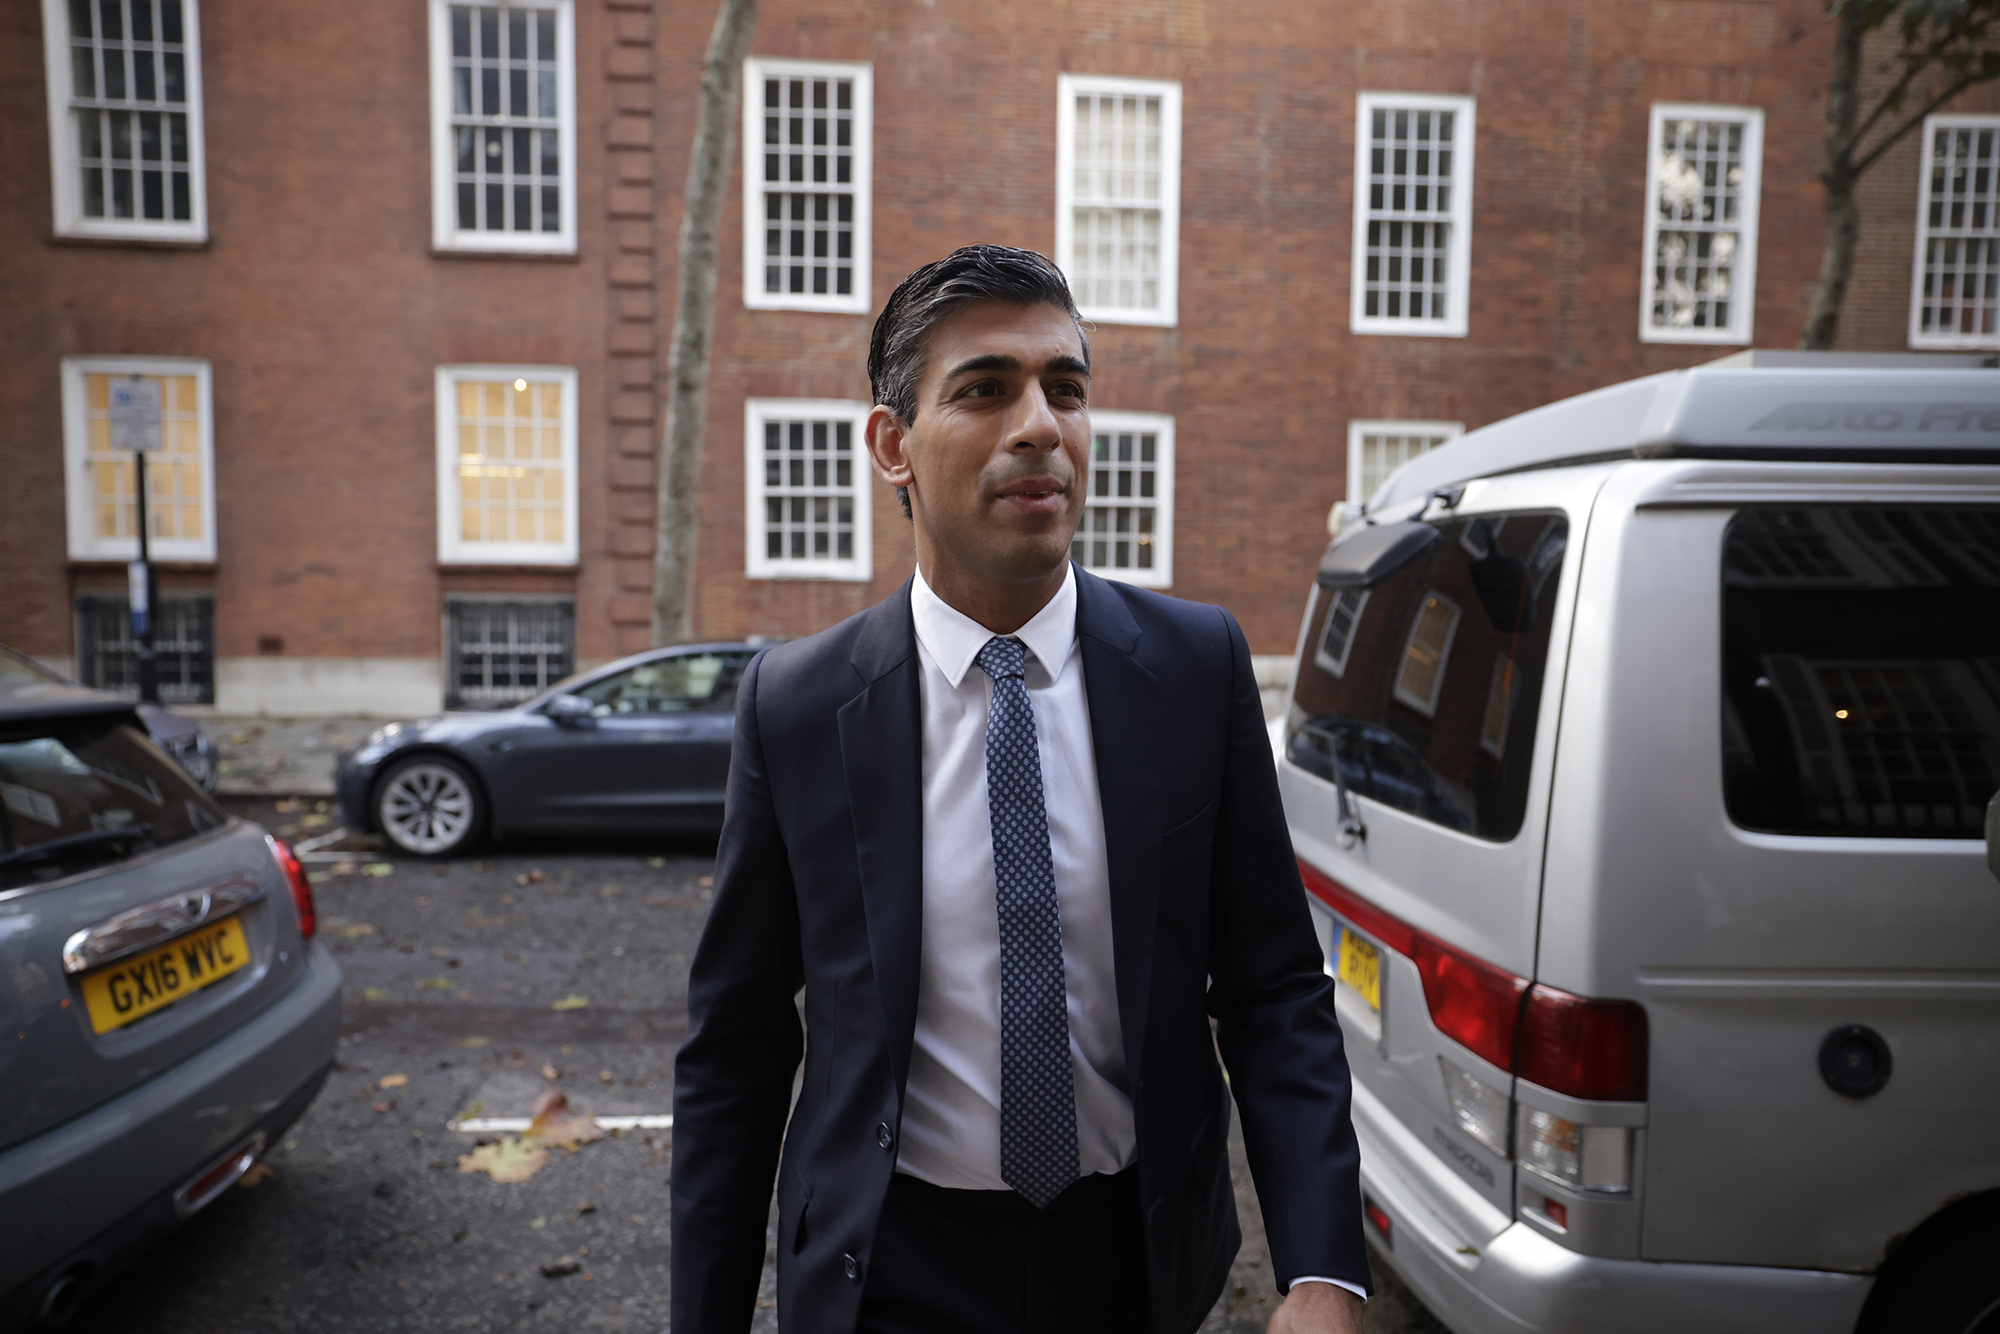 Britain's former Chancellor of the Exchequer Rishi Sunak arrives at his office in Millbank, in London on Monday.